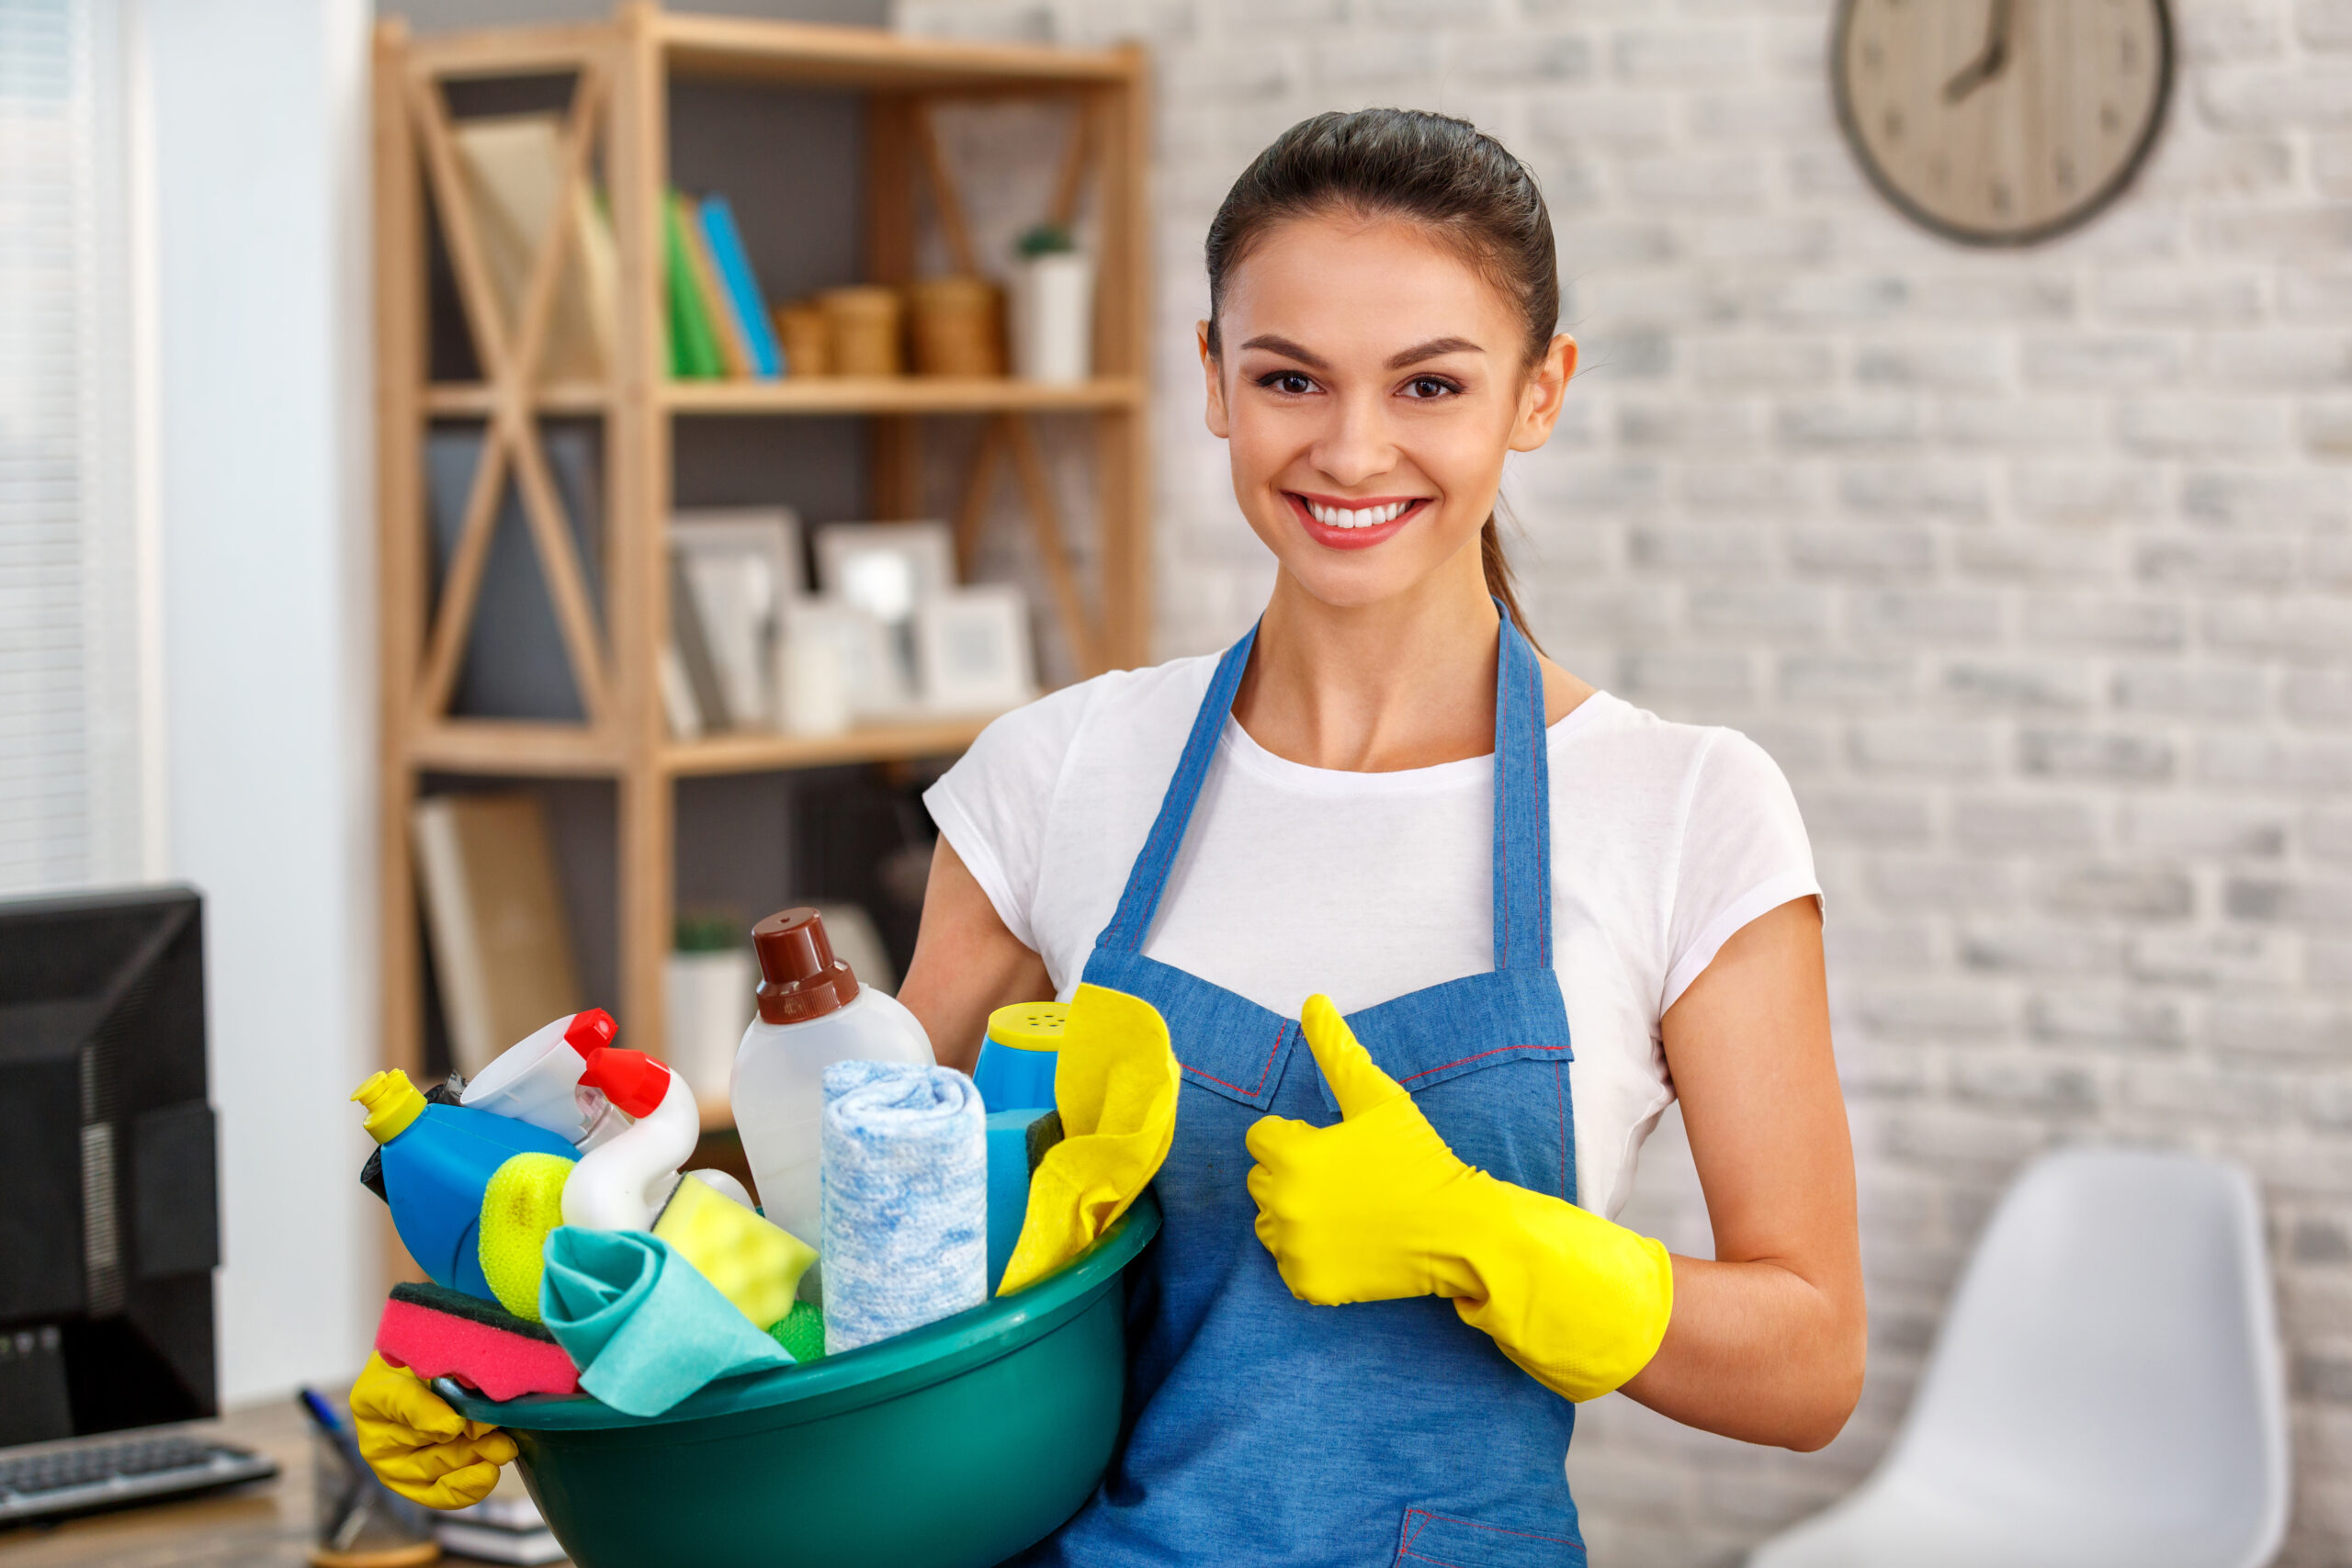 Studio shot of housekeeper. Beautiful woman cleaning office. Woman wearing gloves, smiling, showing thumb up and holding bowl full of bottles with disinfectant